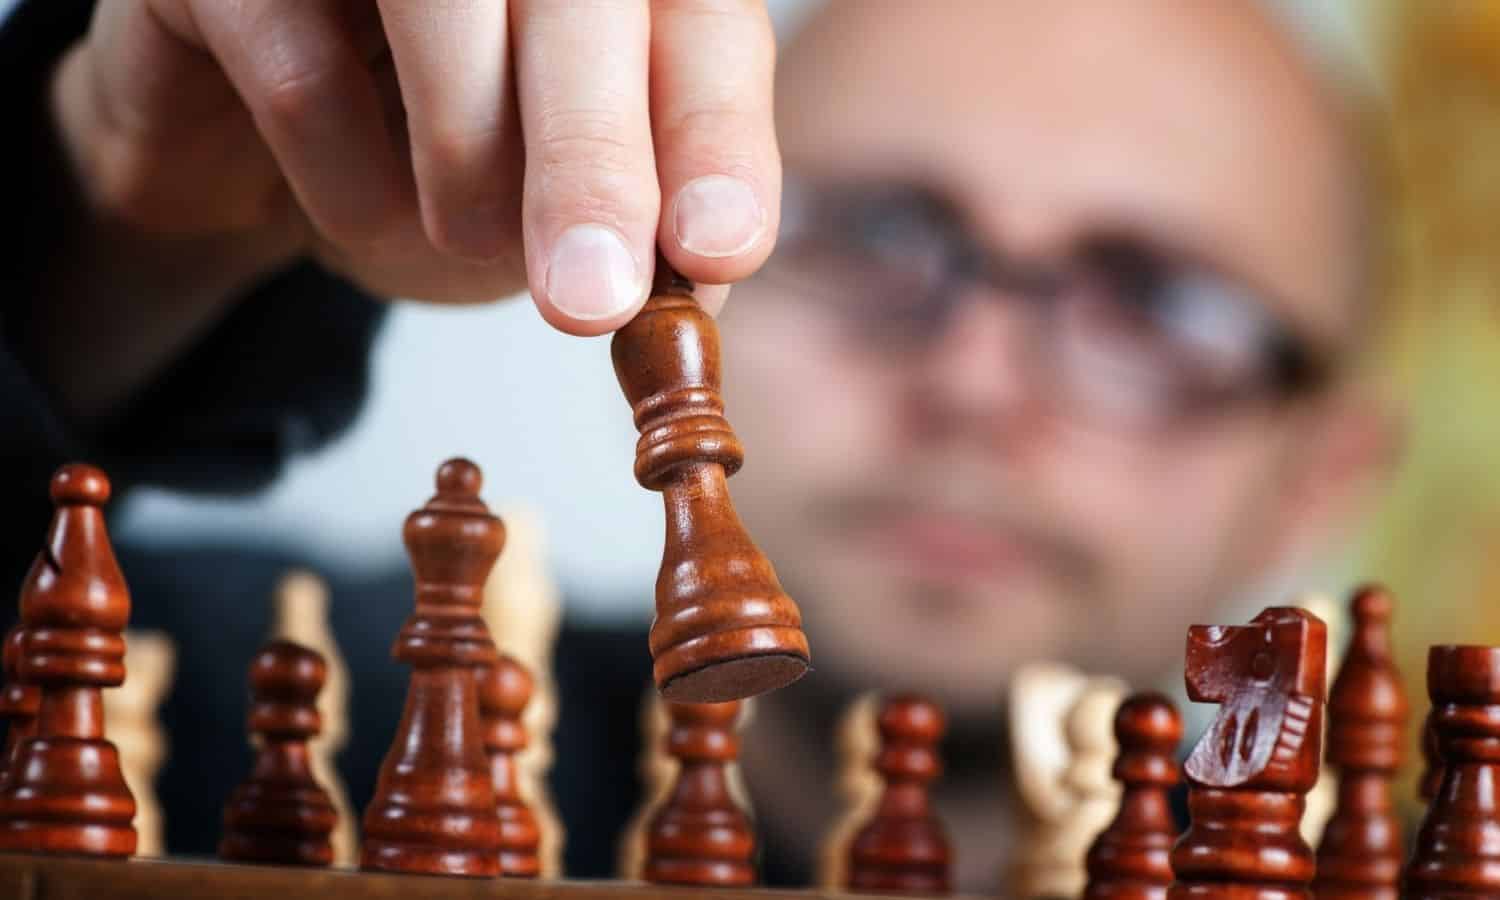 Do chess players have high IQ? 